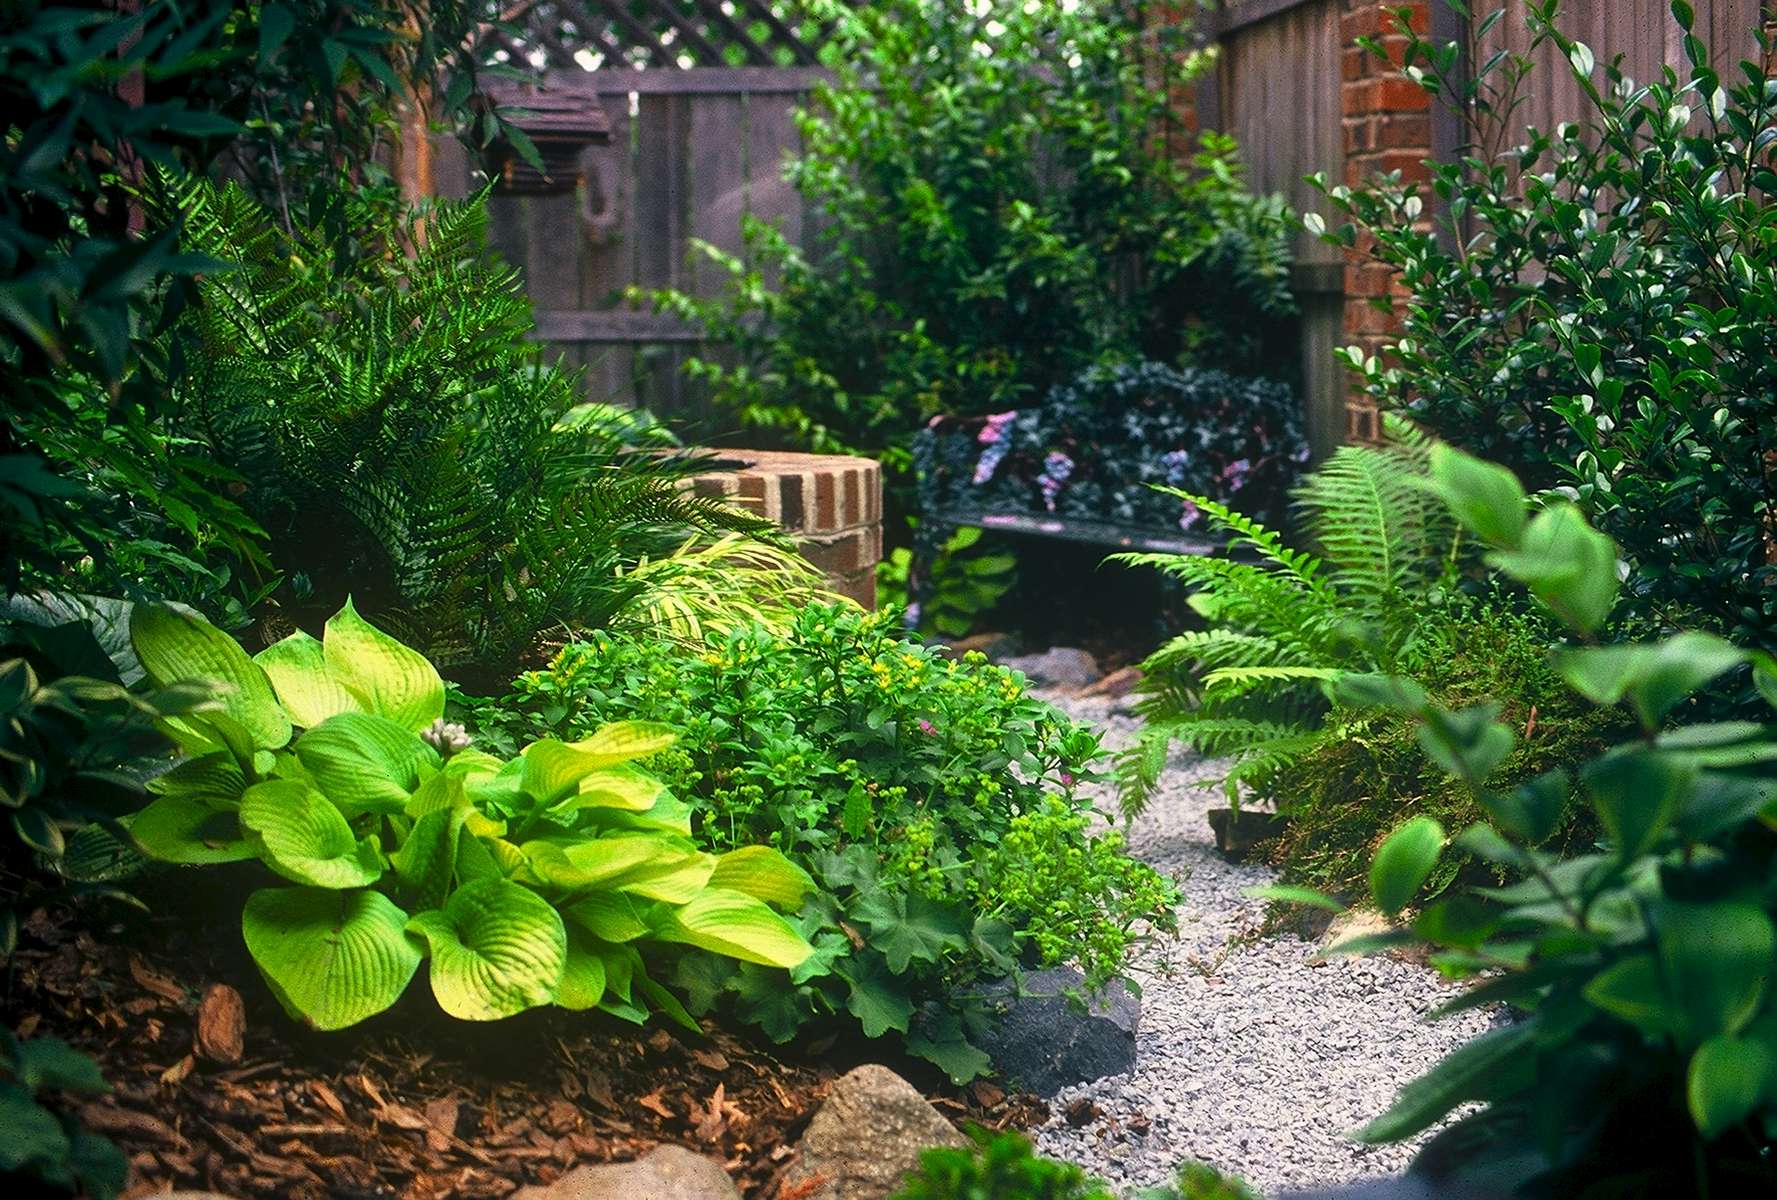 The winding crushed stone path meanders past lush hosta, ferns and heucheras, providing abundant sensory pleasure punctuated at its end with an endearing garden niche . . . a raised, circular fountain and wrought iron bench . . . just right for contemplating the good things in life!